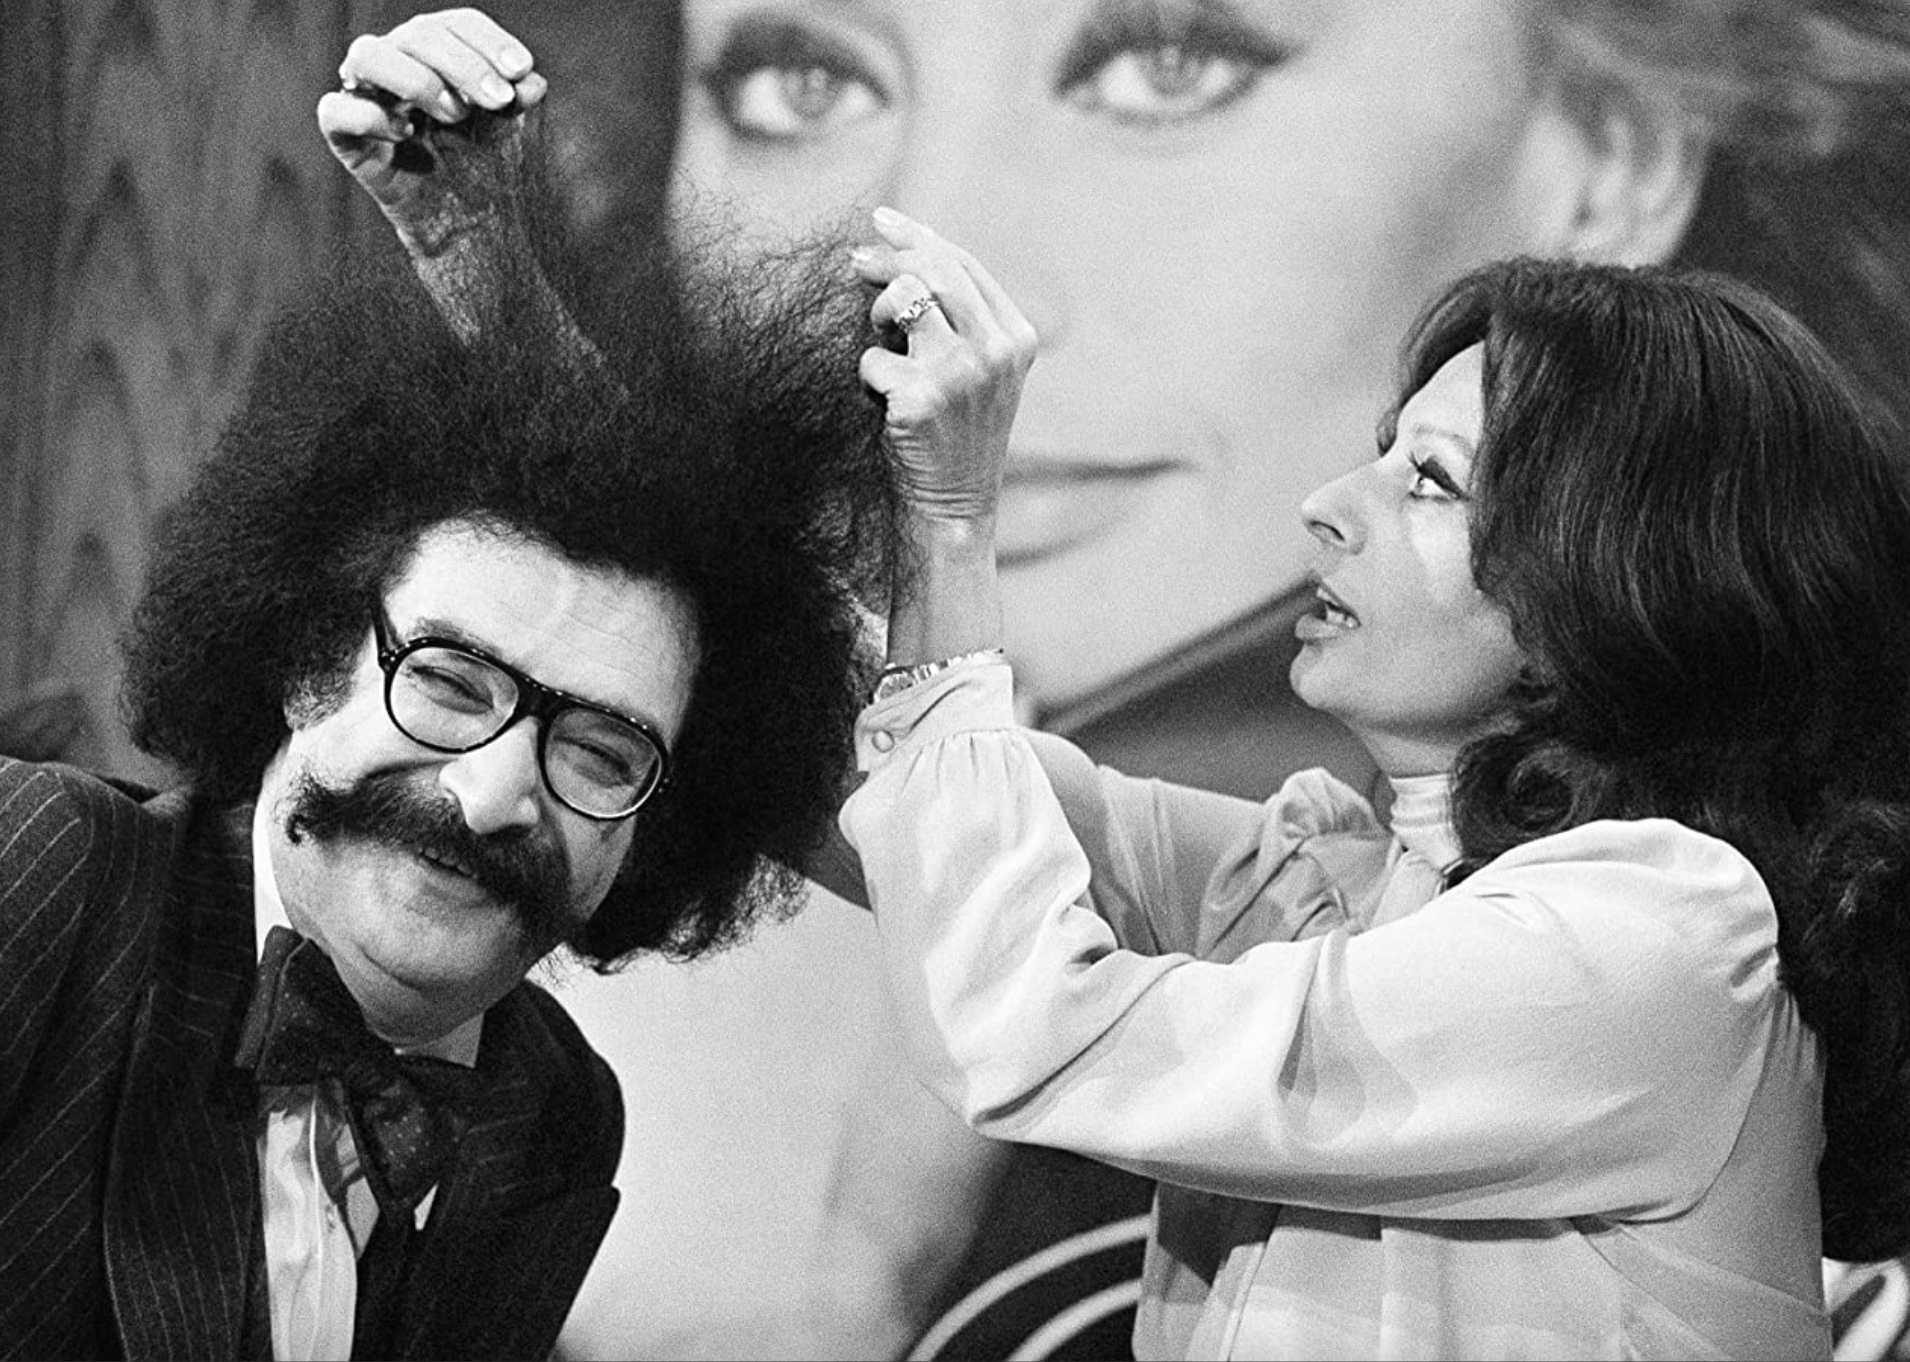 Sophia Loren and Gene Shalit on an episode of "Today".